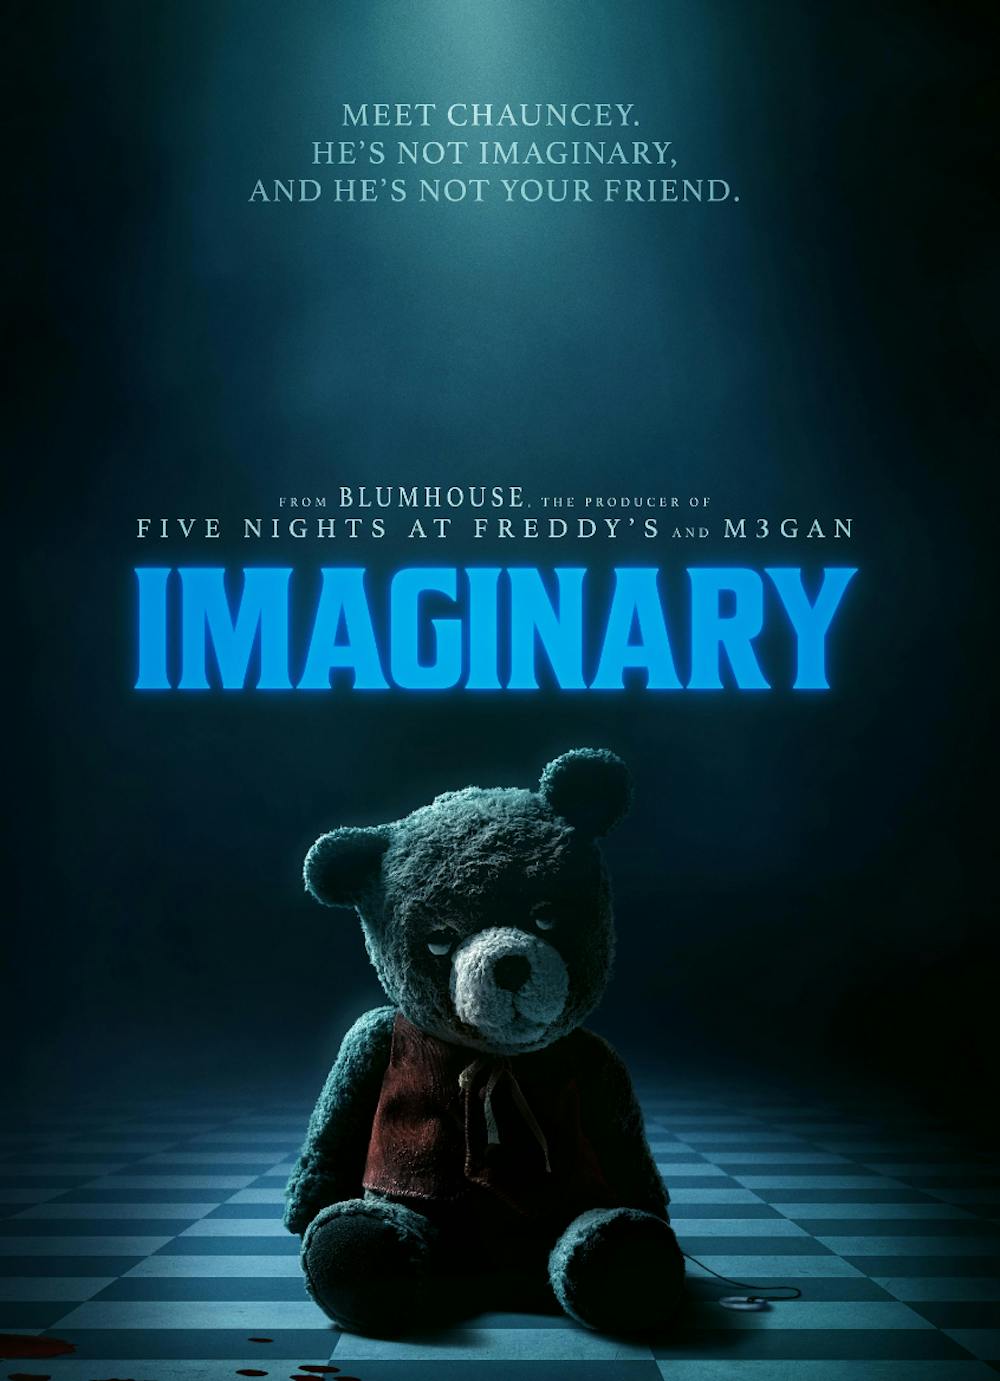 <p><em>Despite the dexterity and soundness of Blumhouse’s own prolonged existence, their latest horror film “Imaginary” solely finds its way into theaters rather than into the imagination. (Photo courtesy of </em><a href="https://www.imdb.com/title/tt26658104/?ref_=tt_mv_close" target=""><em>IMDb</em></a><em>)</em></p>